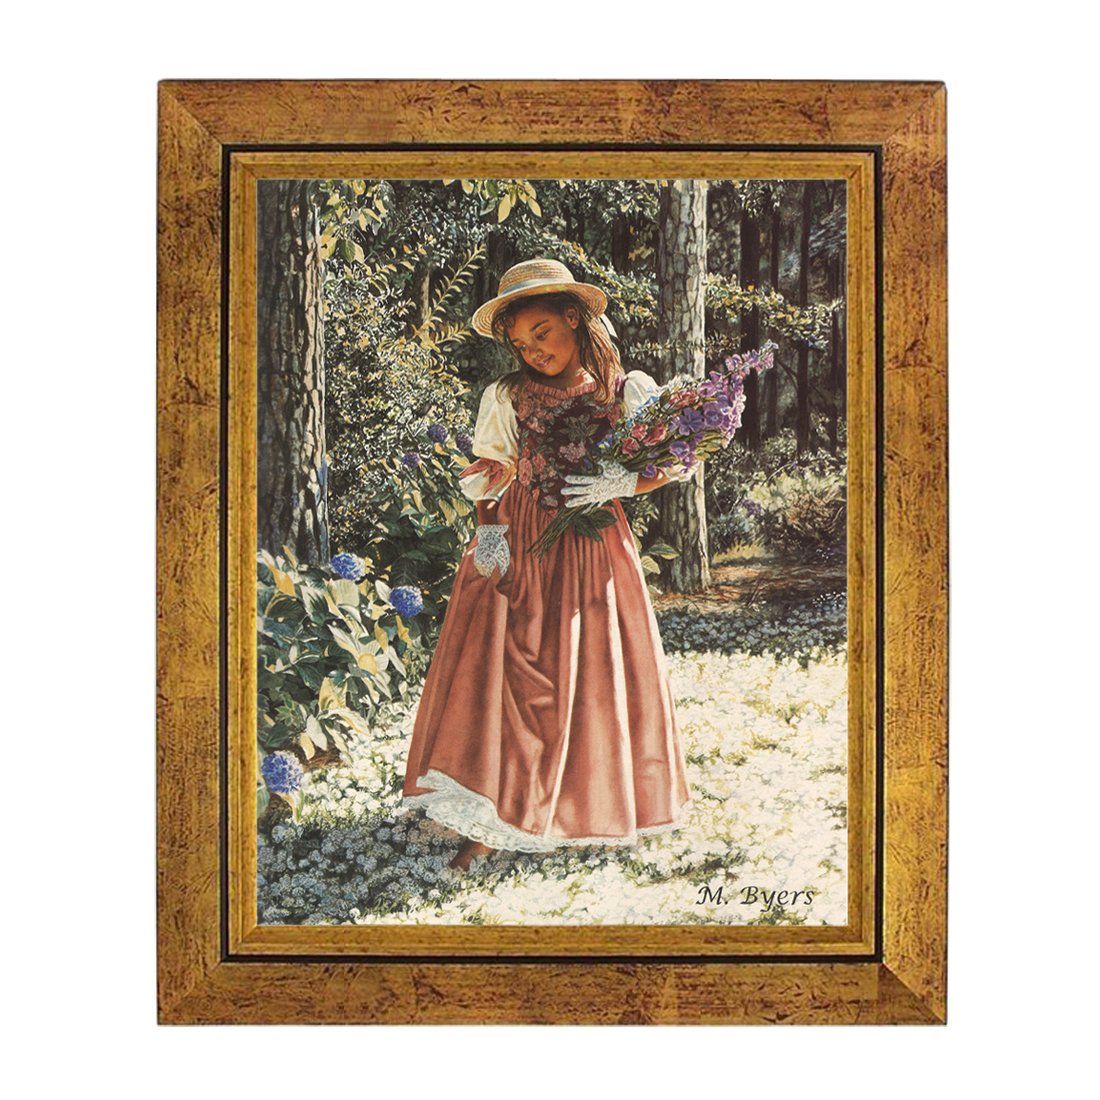 2 of 4: Girl Carrying Flowers by Melinda Byers (Gold Frame)